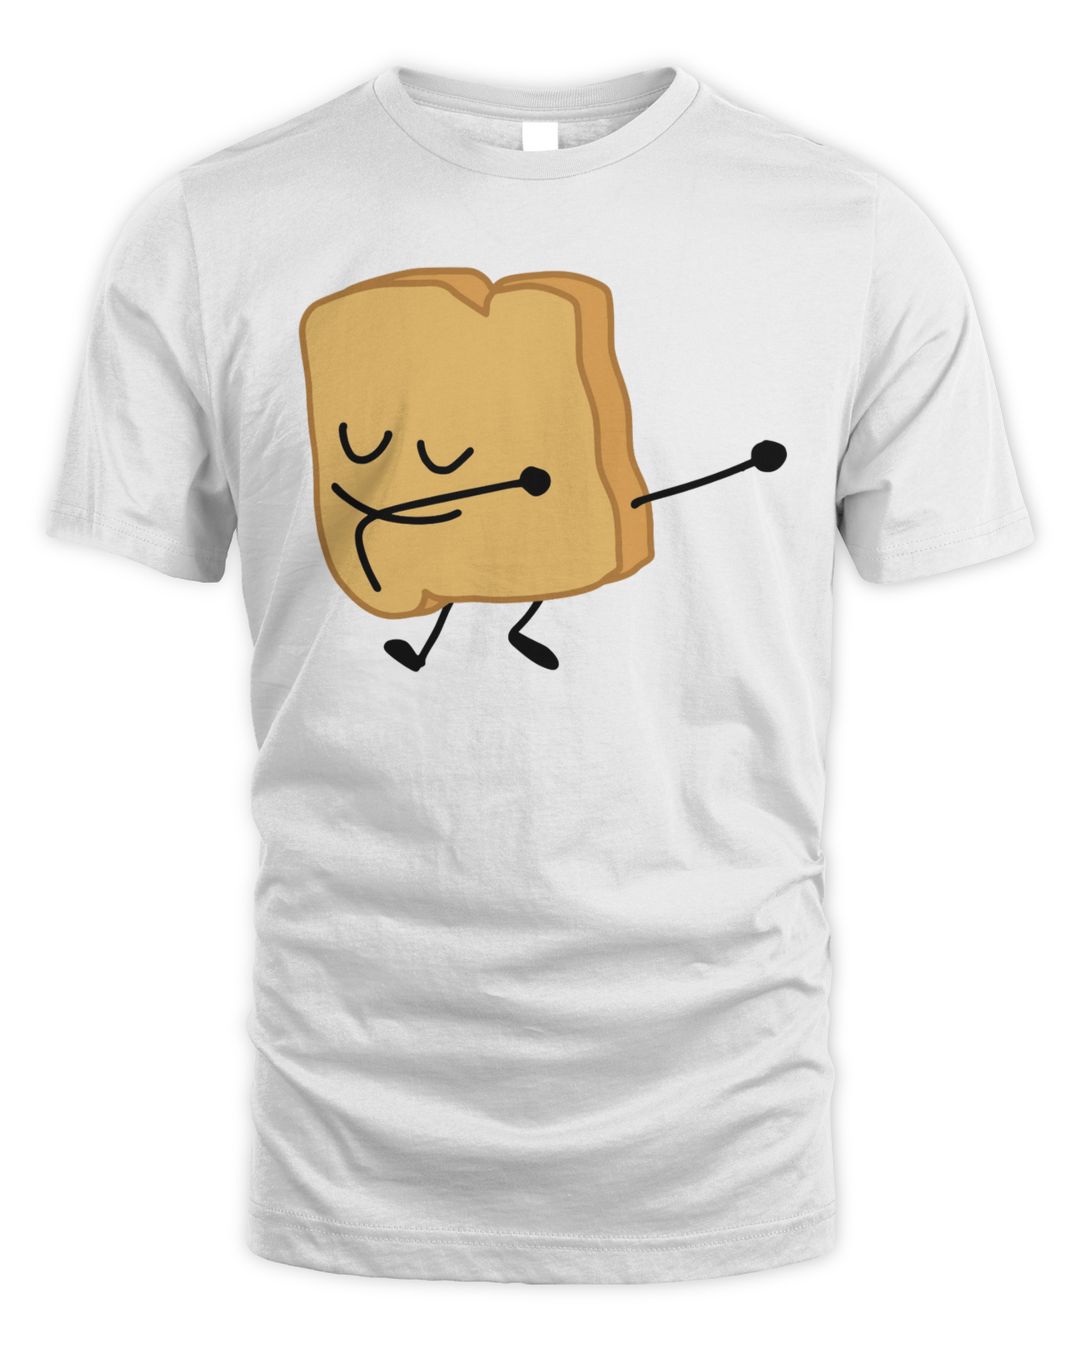 Bfdi Merch Woody In Iconic Pose Shirt